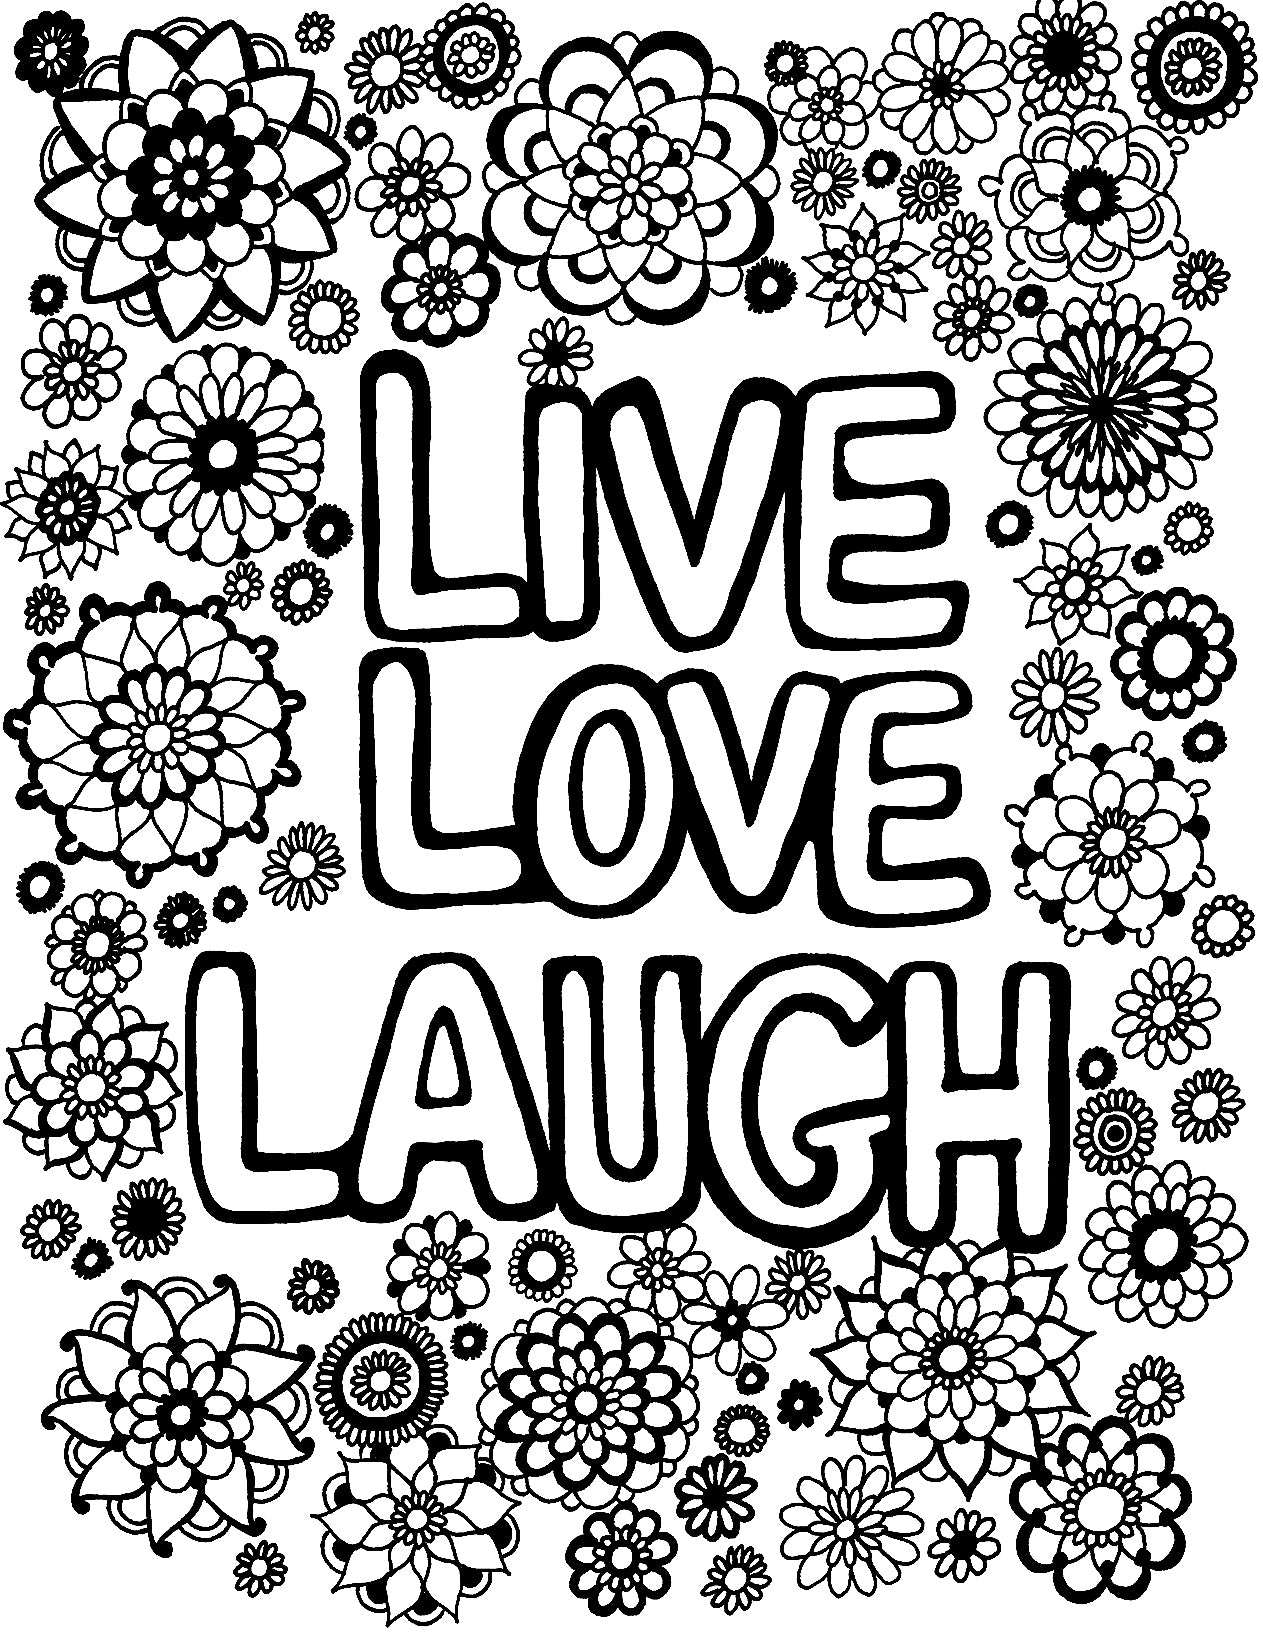 A coloring page featuring the uplifting phrase 'LIVE LOVE LAUGH' surrounded by a diverse array of mandala-style flowers and geometric floral patterns. The whimsical assortment of blooms, varying in sizes and shapes, represents the joy and beauty found in life. The flowers seem to dance around the words, by infusing the image with a sense of vitality and happiness. This image invites individuals to color in the warmth and positivity the words convey. Free coloring page :: YouColor